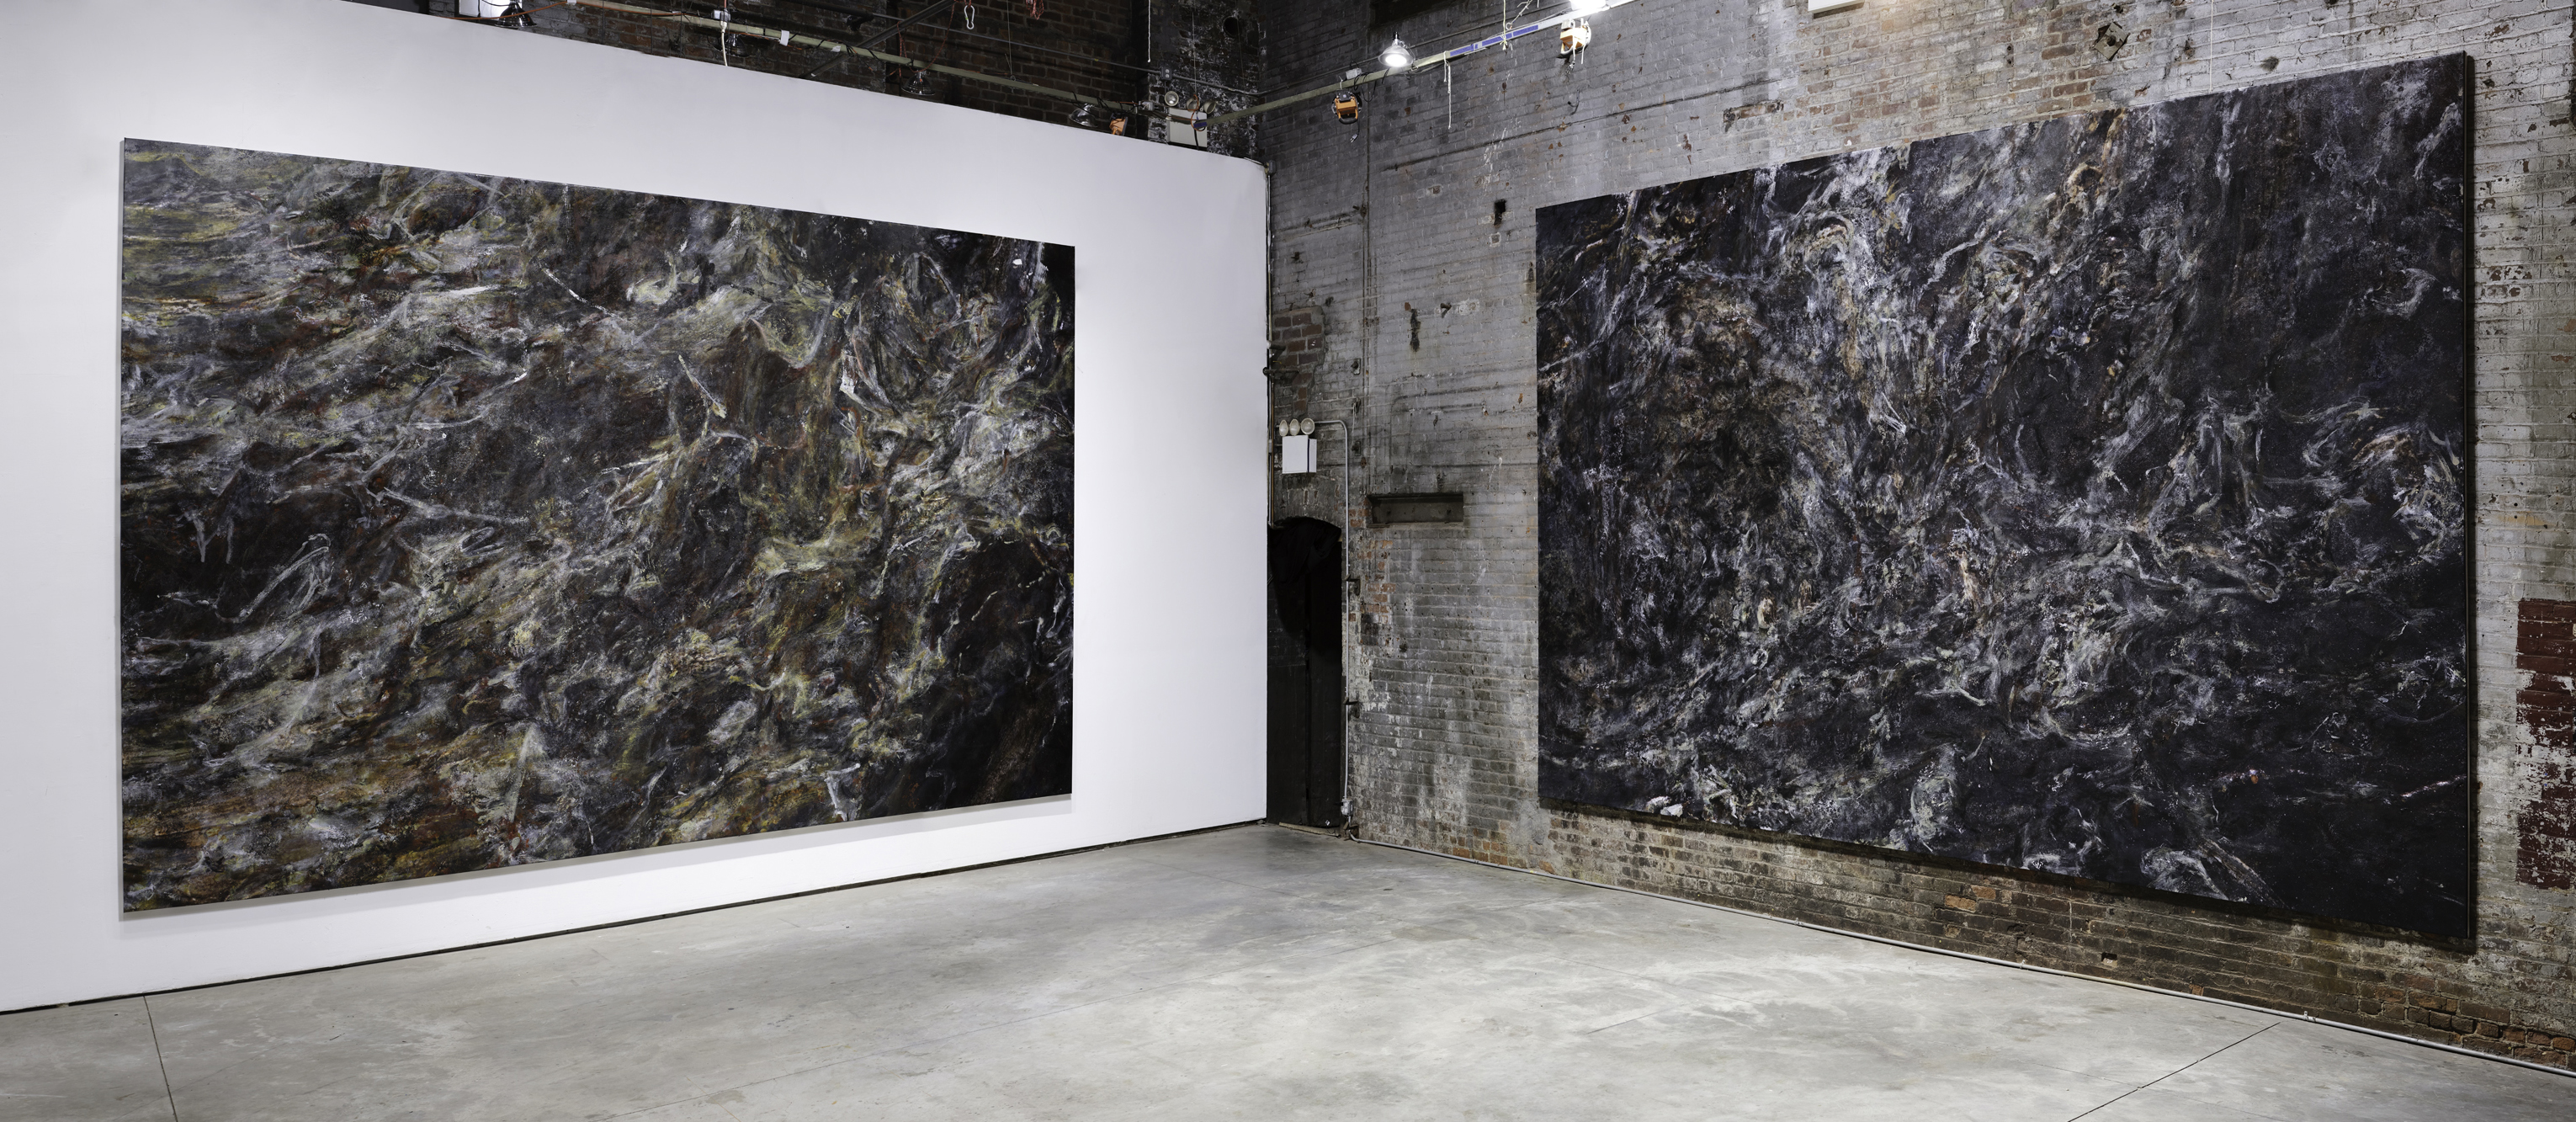 SARDANAPALUS (MAGNASCO), 2020, acrylic and water-based urethane dispersion - including metallic pigments, glass beads, mineral crystals and shredded tire rubber on stretched photographic vinyl billboard print, 12 x 20 feet (left)  -  MEDUSA (MAGNASCO), 2020, acrylic and water-based urethane dispersion - including metallic pigments, glass beads, mineral crystals and shredded tire rubber on stretched photographic vinyl billboard print, 12 x 20 feet (right)